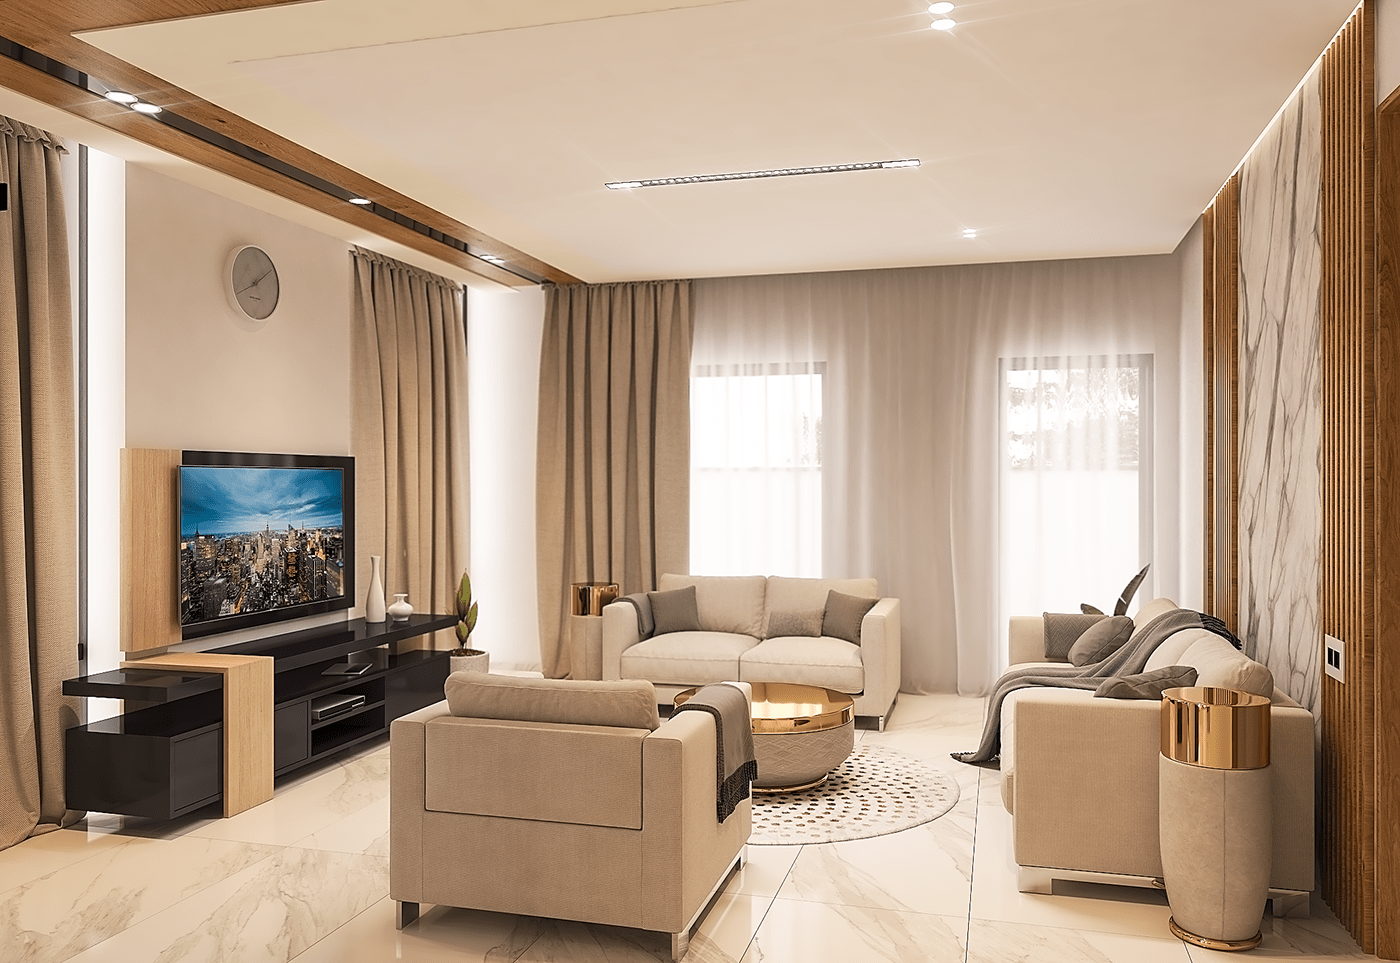 Interior Render of Living Room
Produced in 3ds Max and V-Ray.